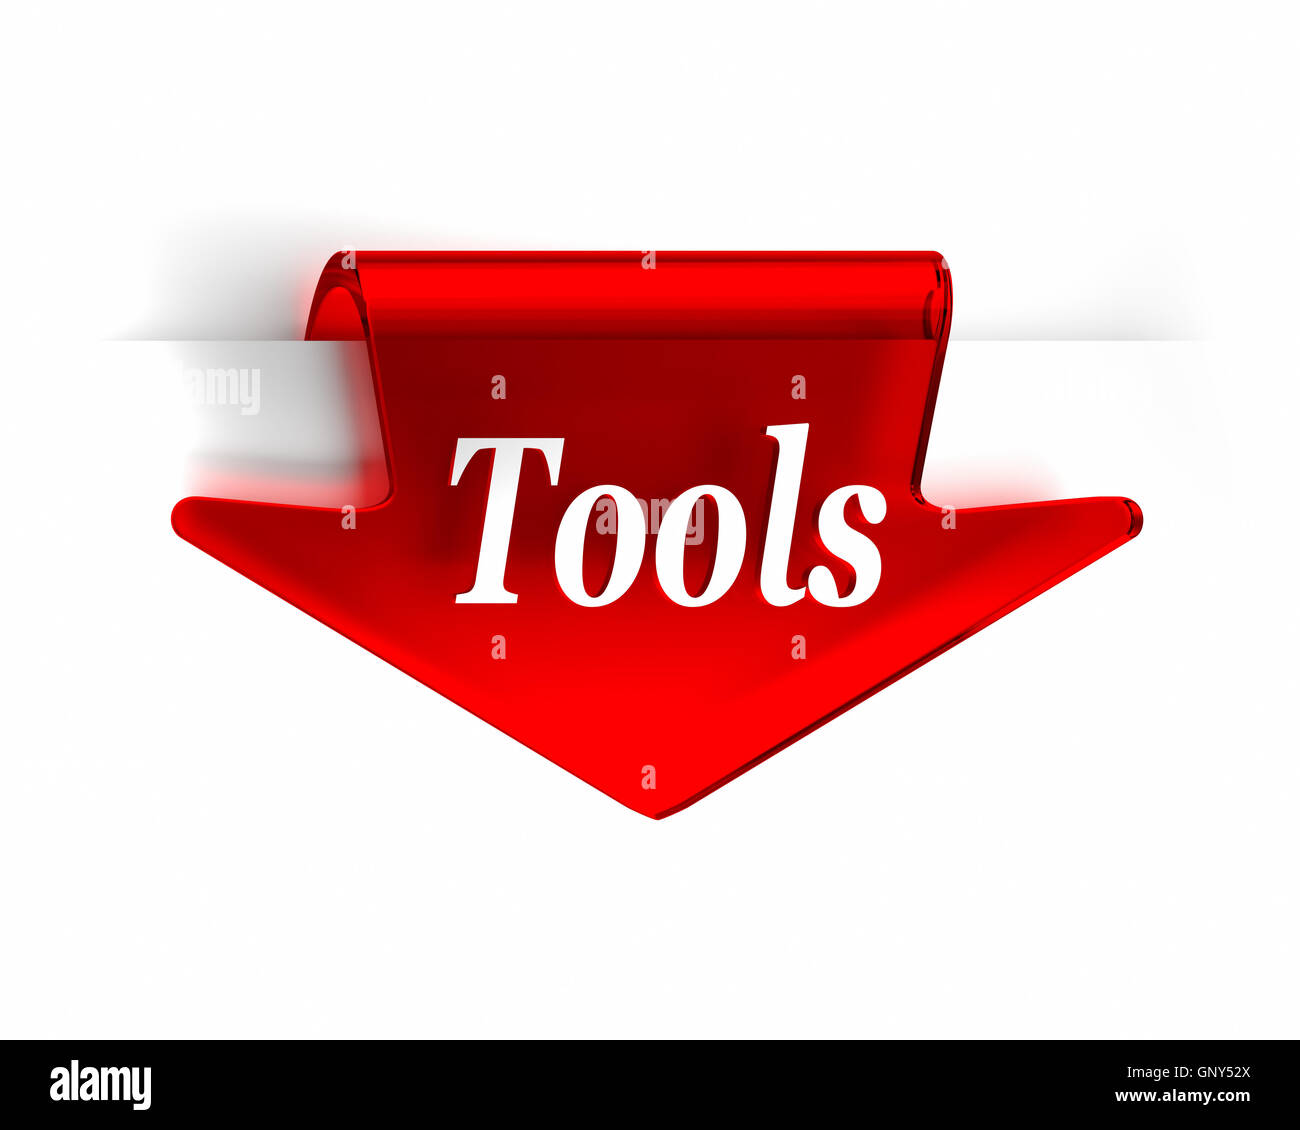 Scrapbooking tools all best world brands Stock Photo - Alamy